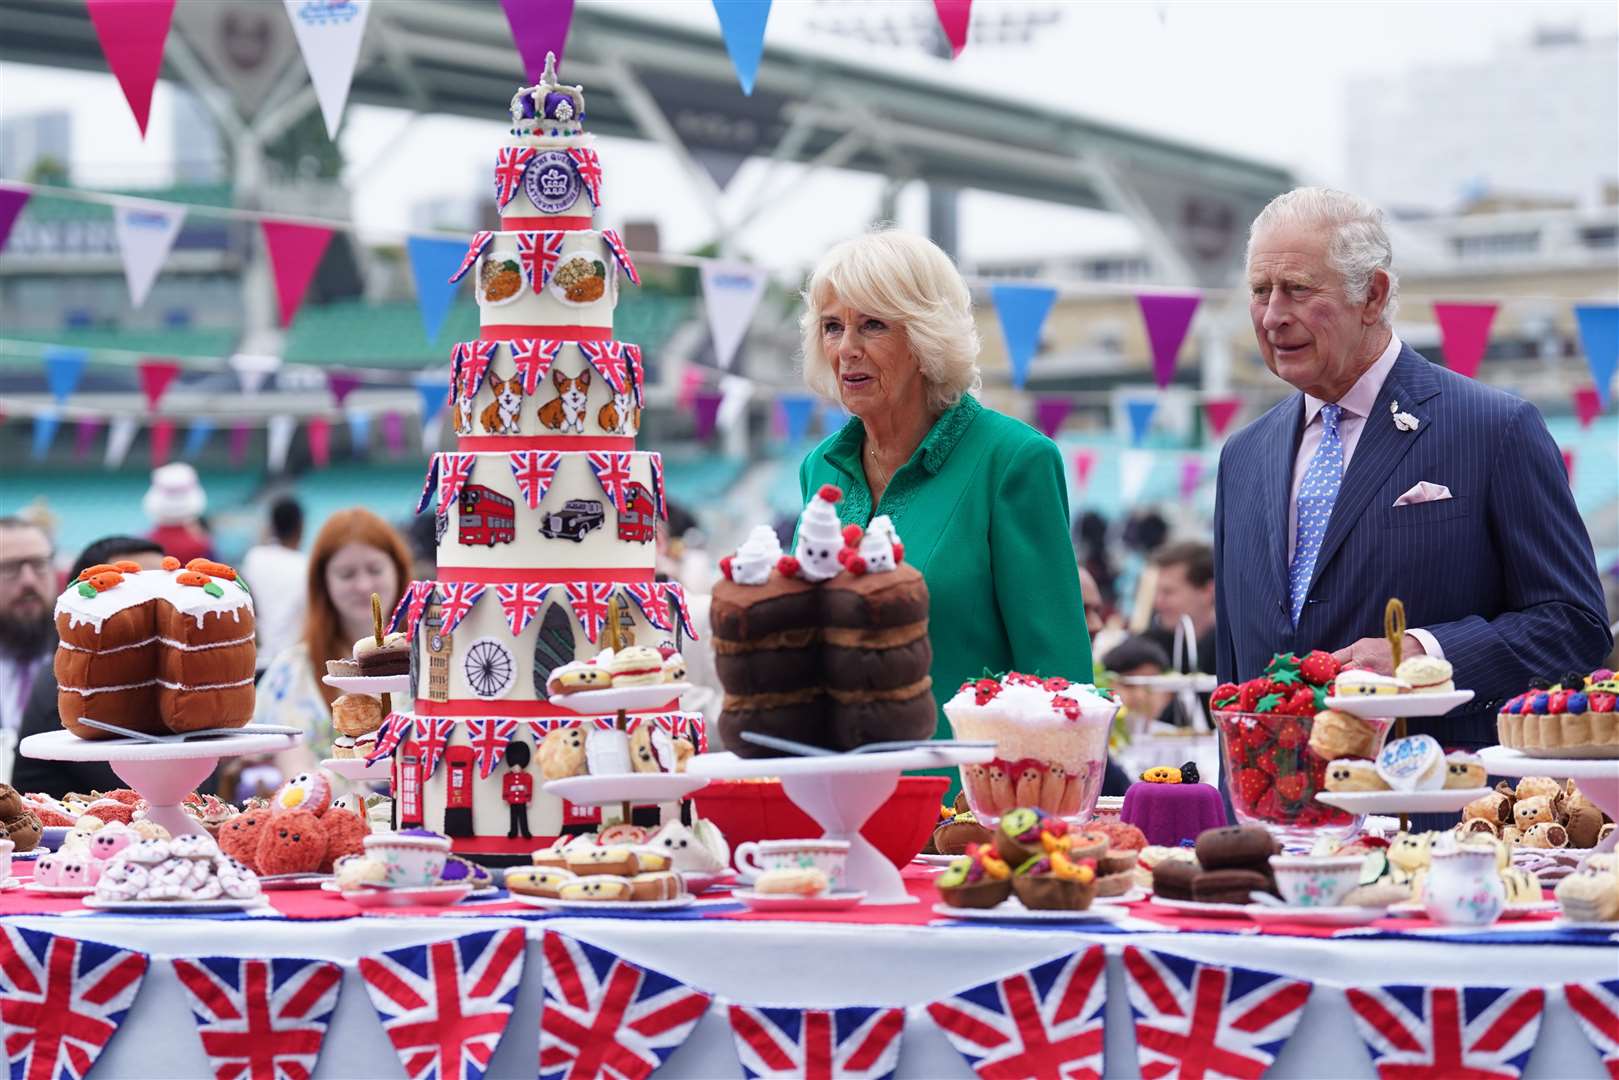 The Prince of Wales and Duchess of Cornwall attend the Big Jubilee Lunch with tables set up on the pitch at The Oval cricket ground (Stefan Rousseau/PA)